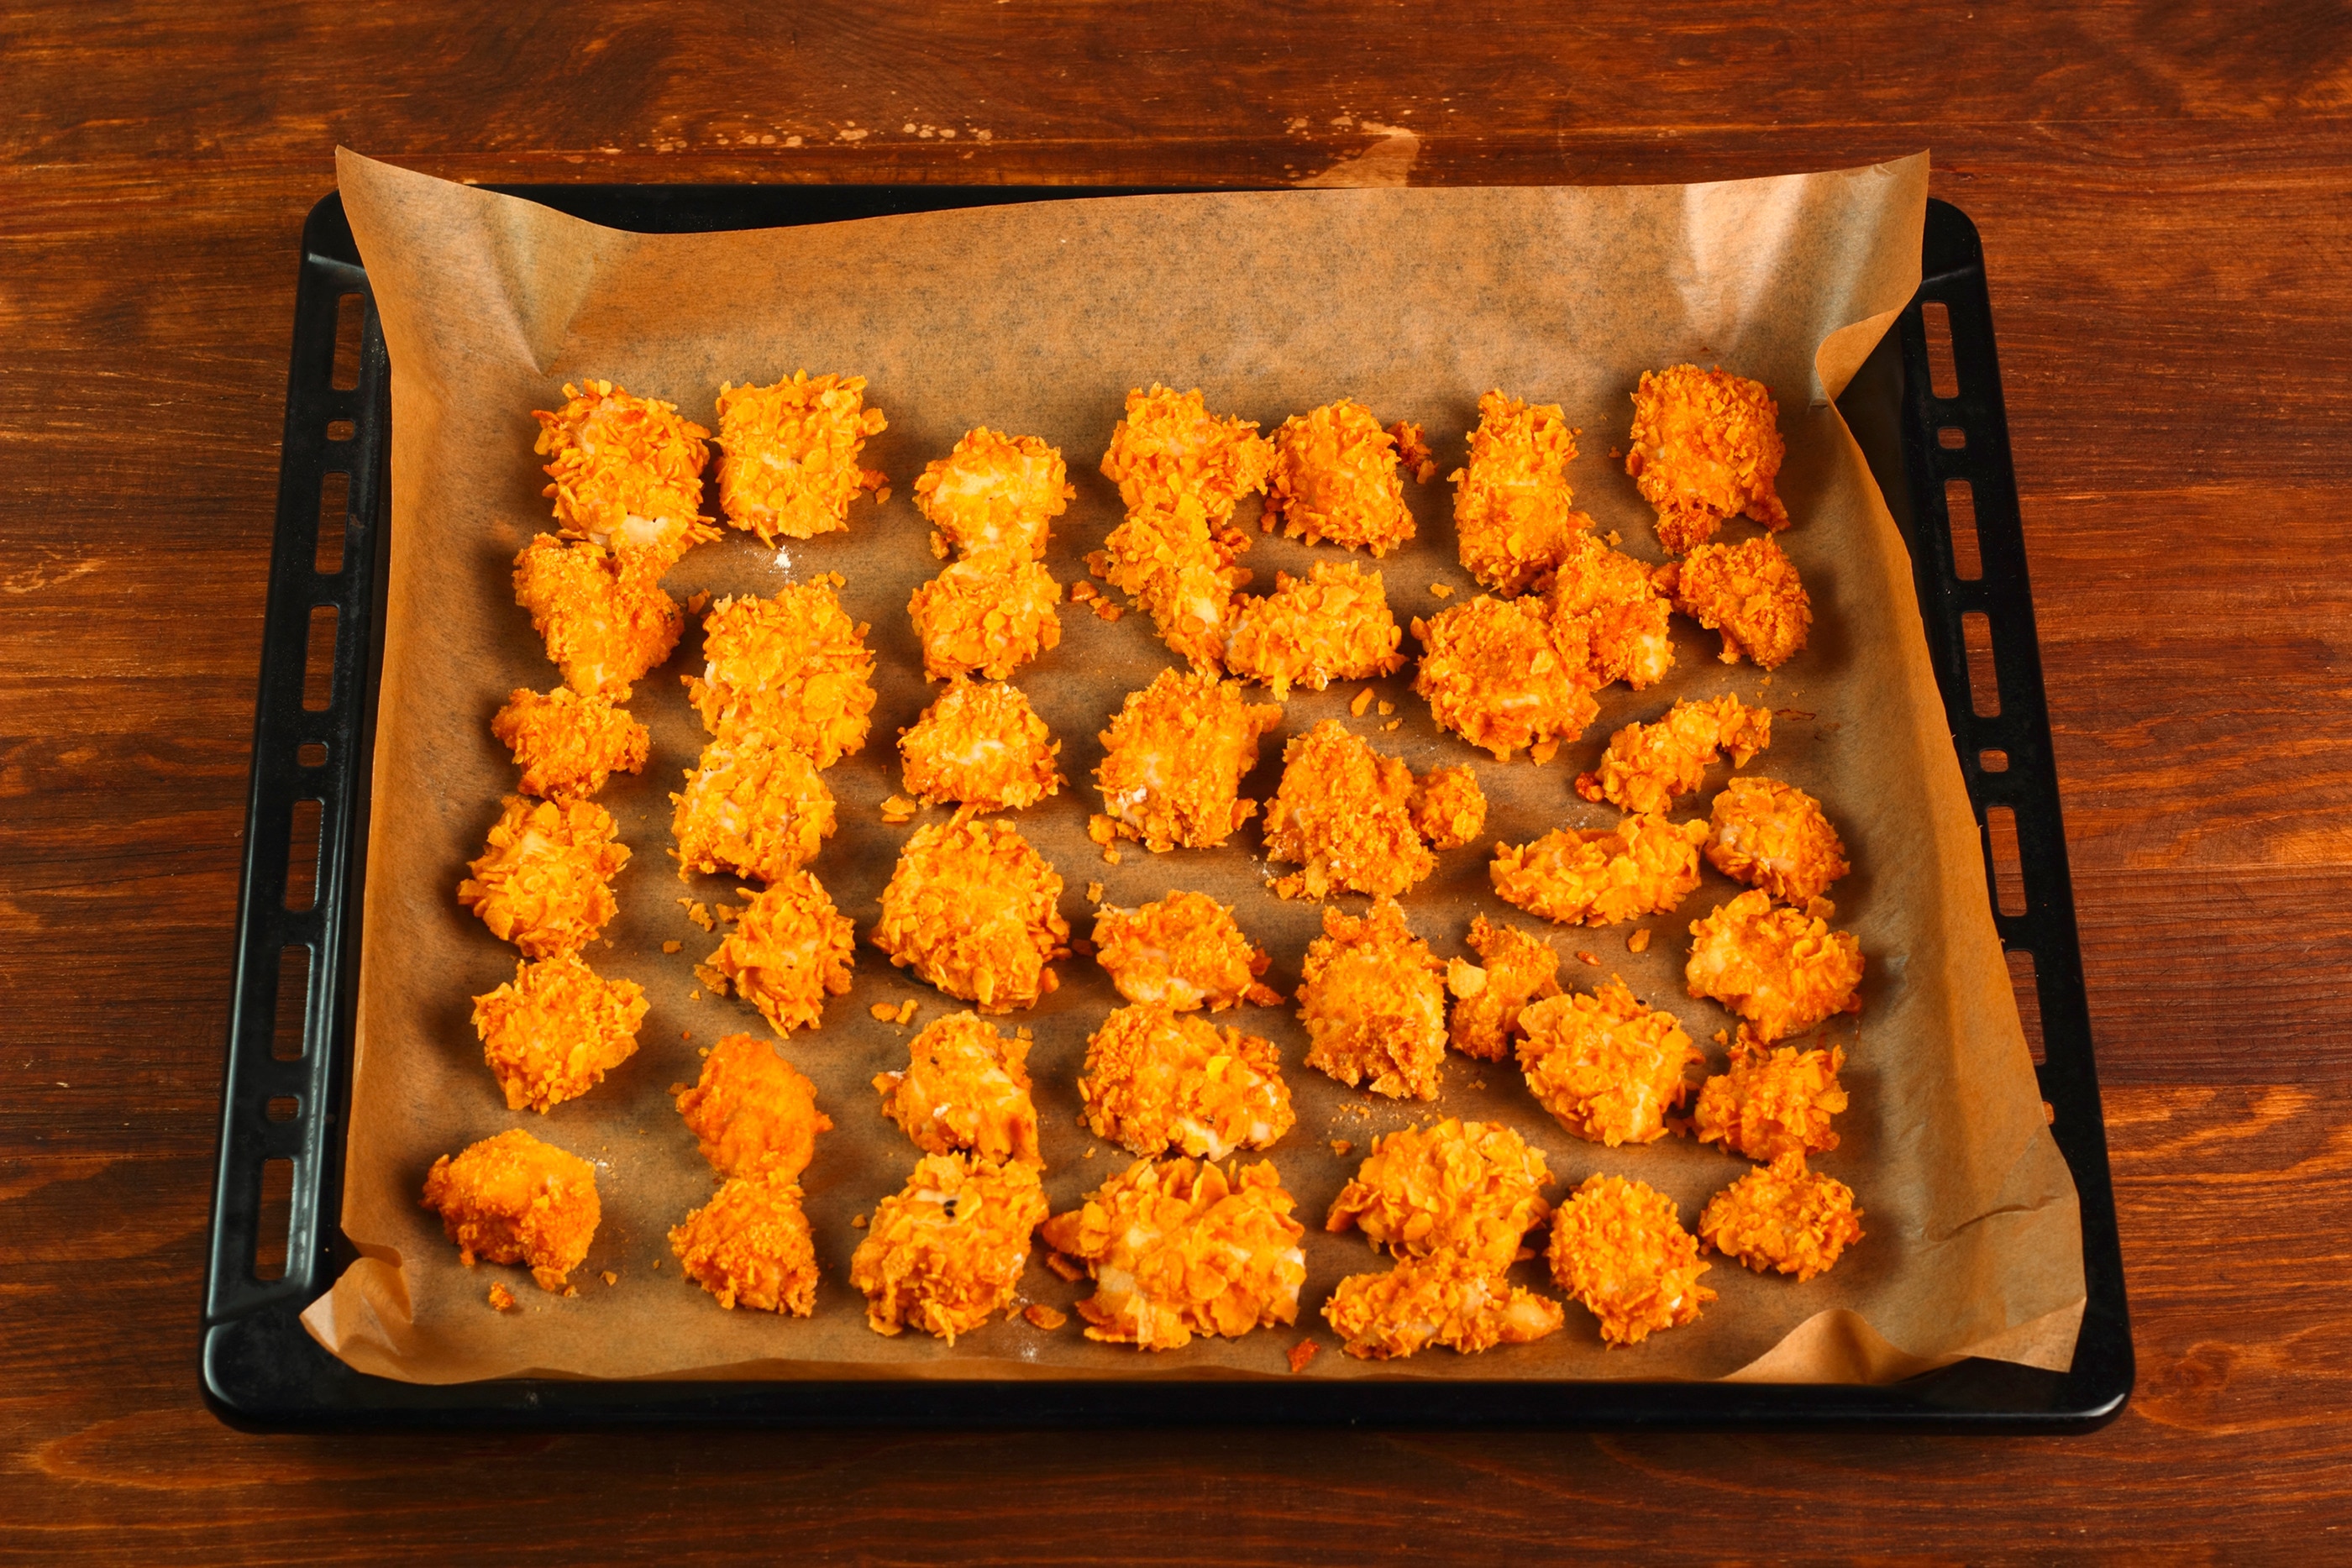 Baking tray lined with parchment paper full of chicken nuggets